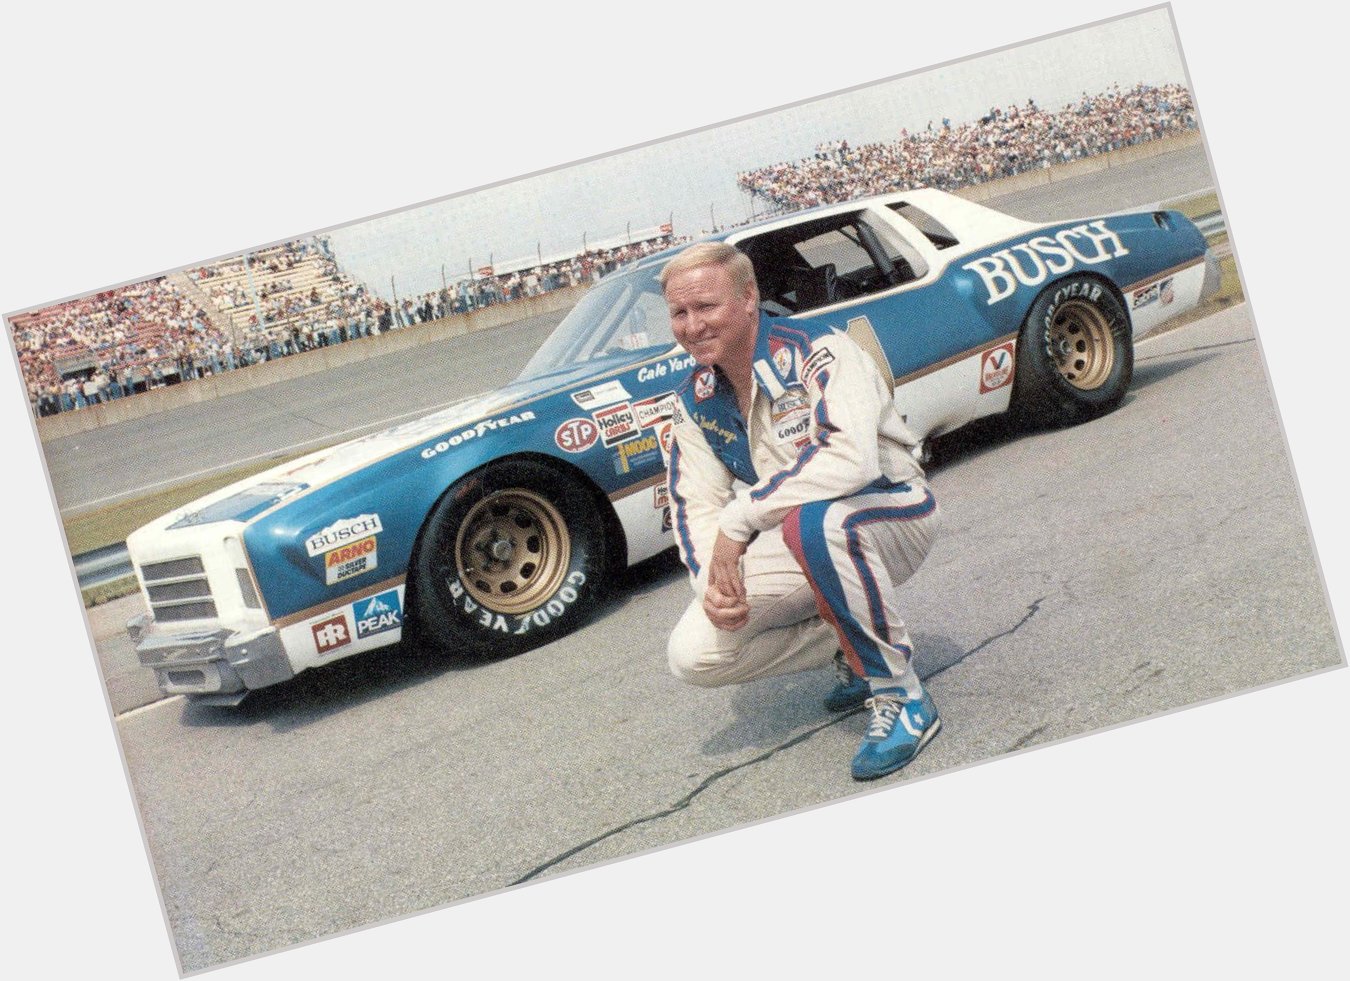 Happy Birthday to Cale Yarborough, who turns 78 today! 